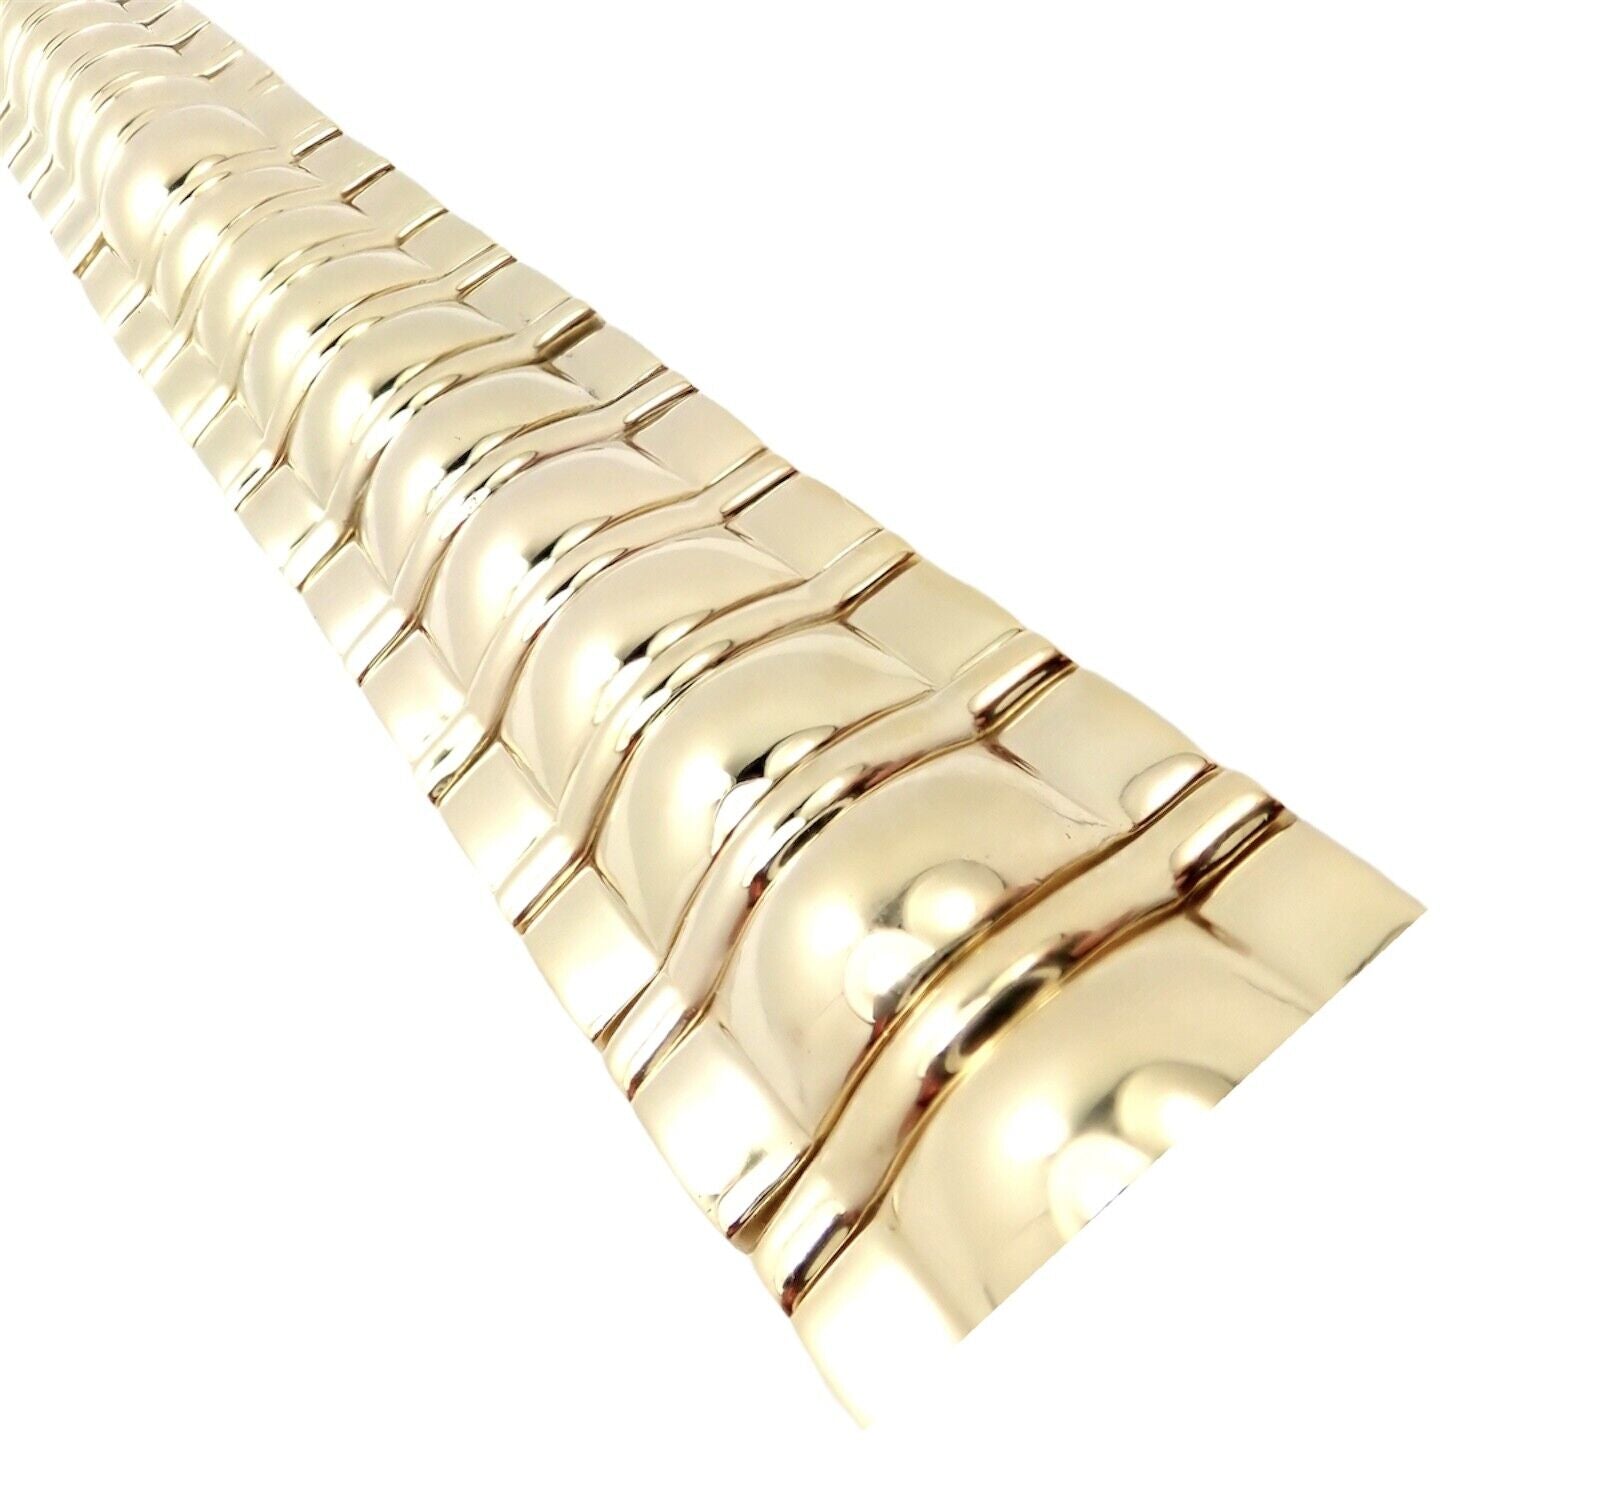 Piaget Jewelry & Watches:Fine Jewelry:Bracelets & Charms Authentic! Piaget 18k Yellow Gold Classic Thick Limited Edition 1990 Bracelet